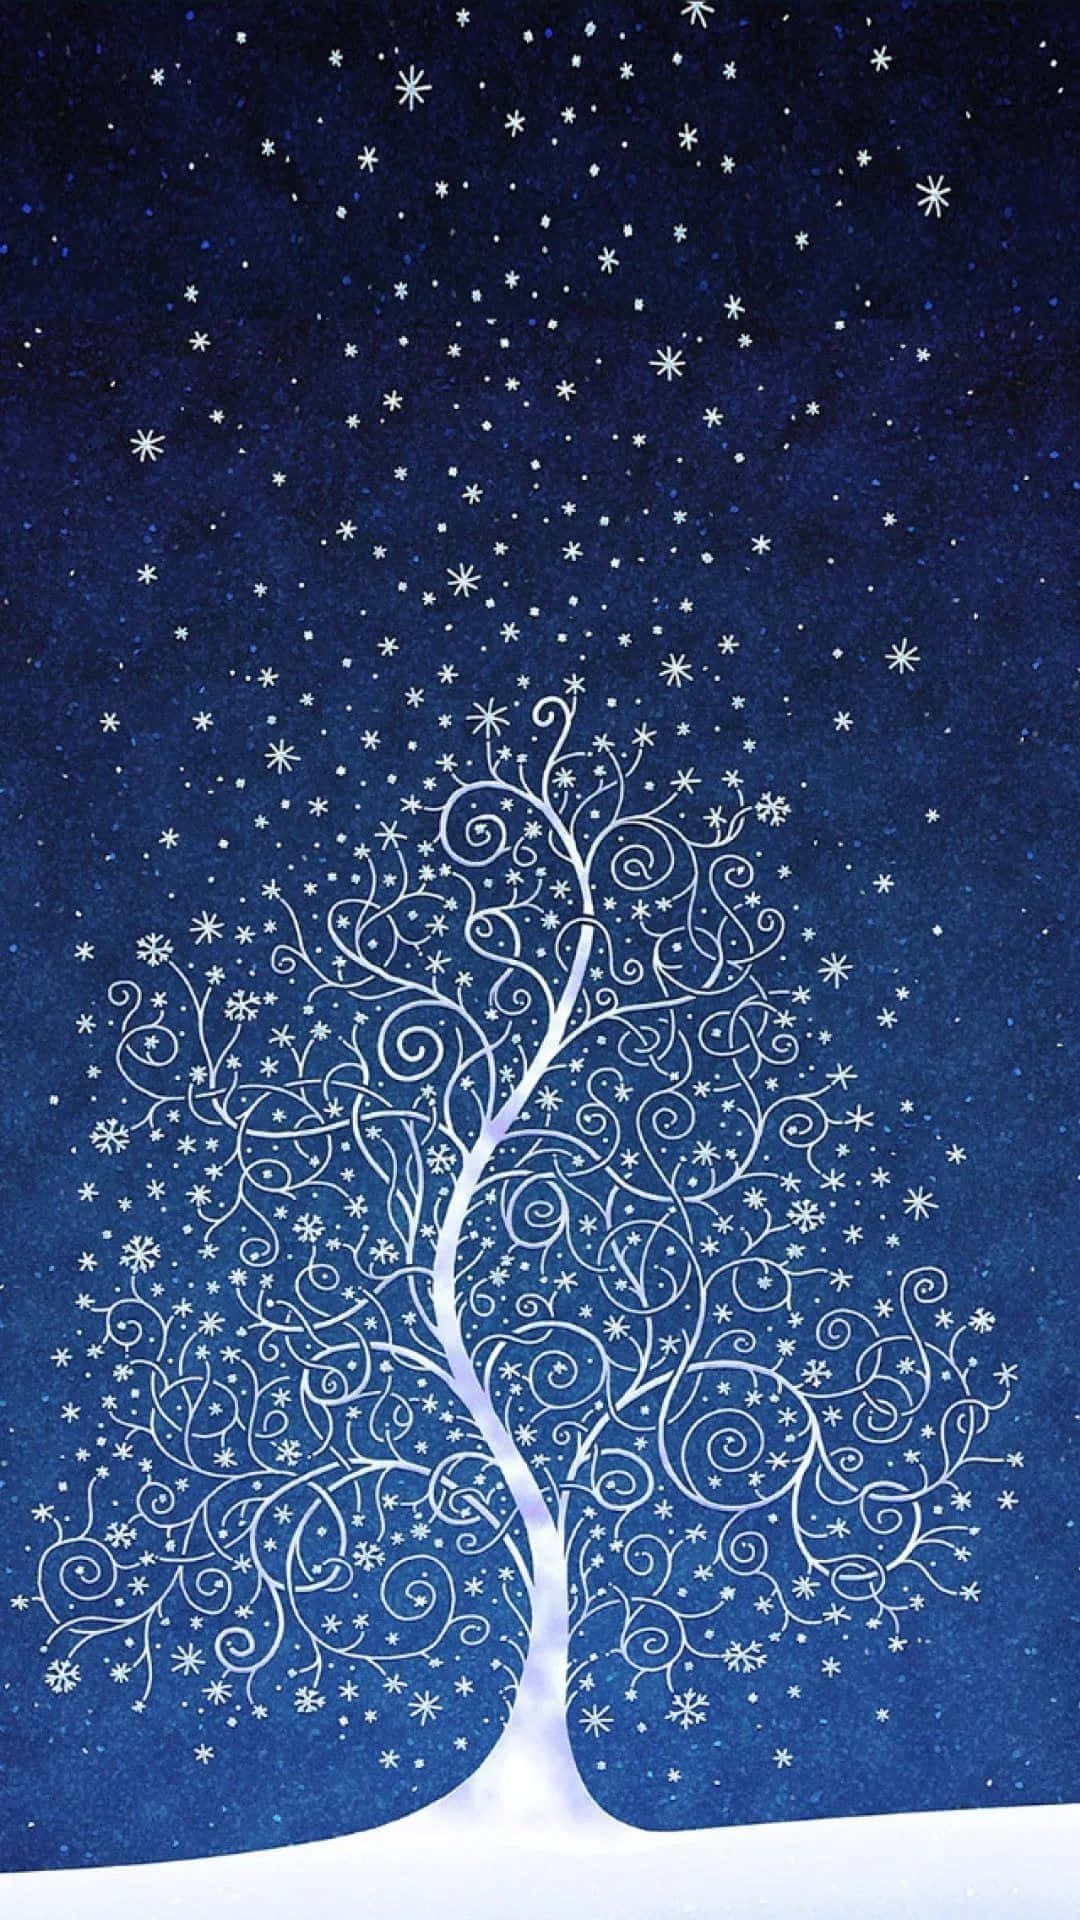 A White Tree With Stars In The Snow